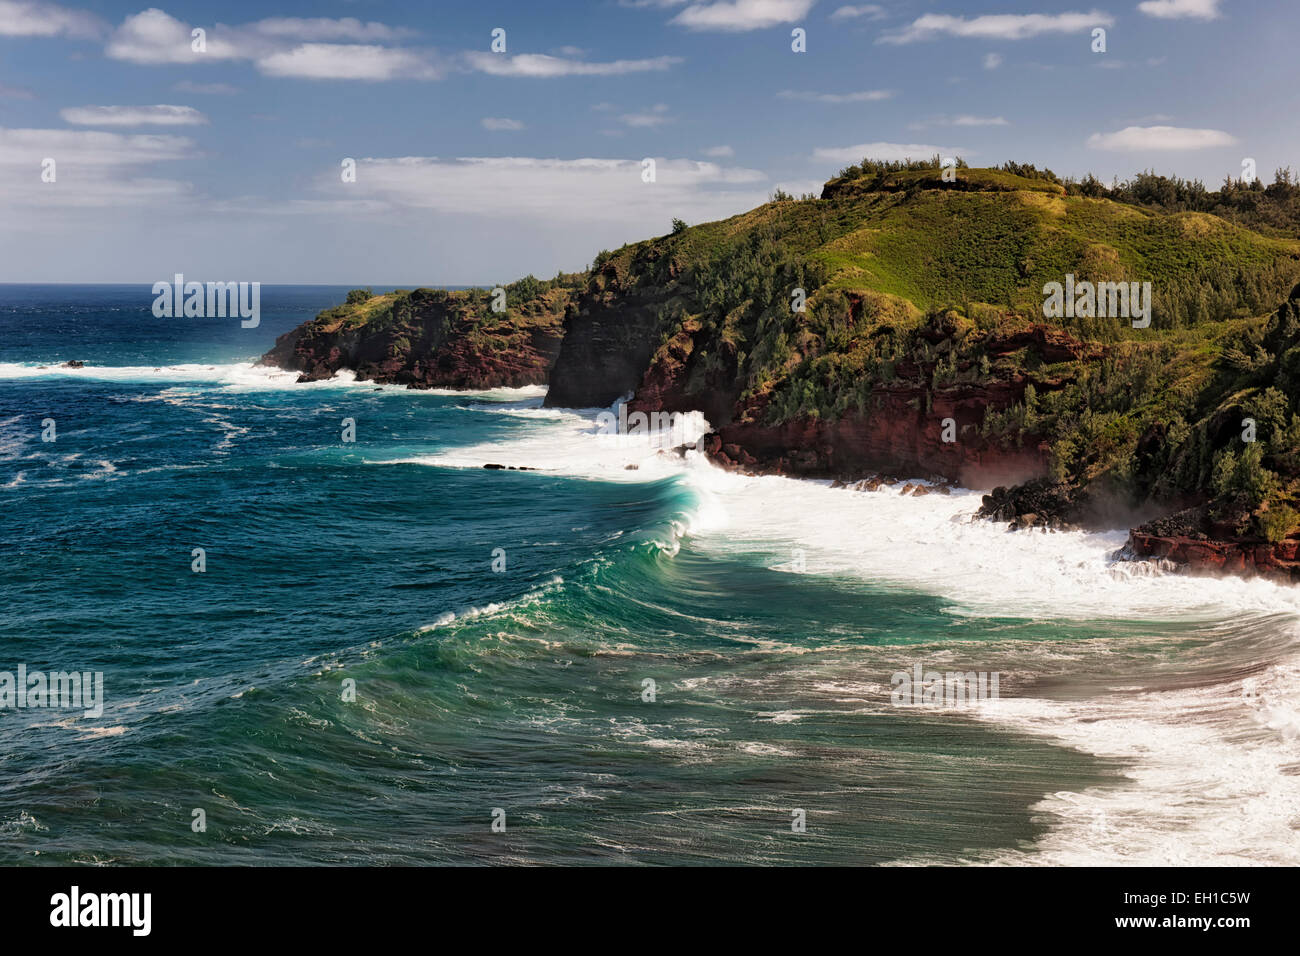 The relentless Pacific Ocean crashes against the cliffs overlooking Honolua Bay on Hawaii's island of Maui. Stock Photo